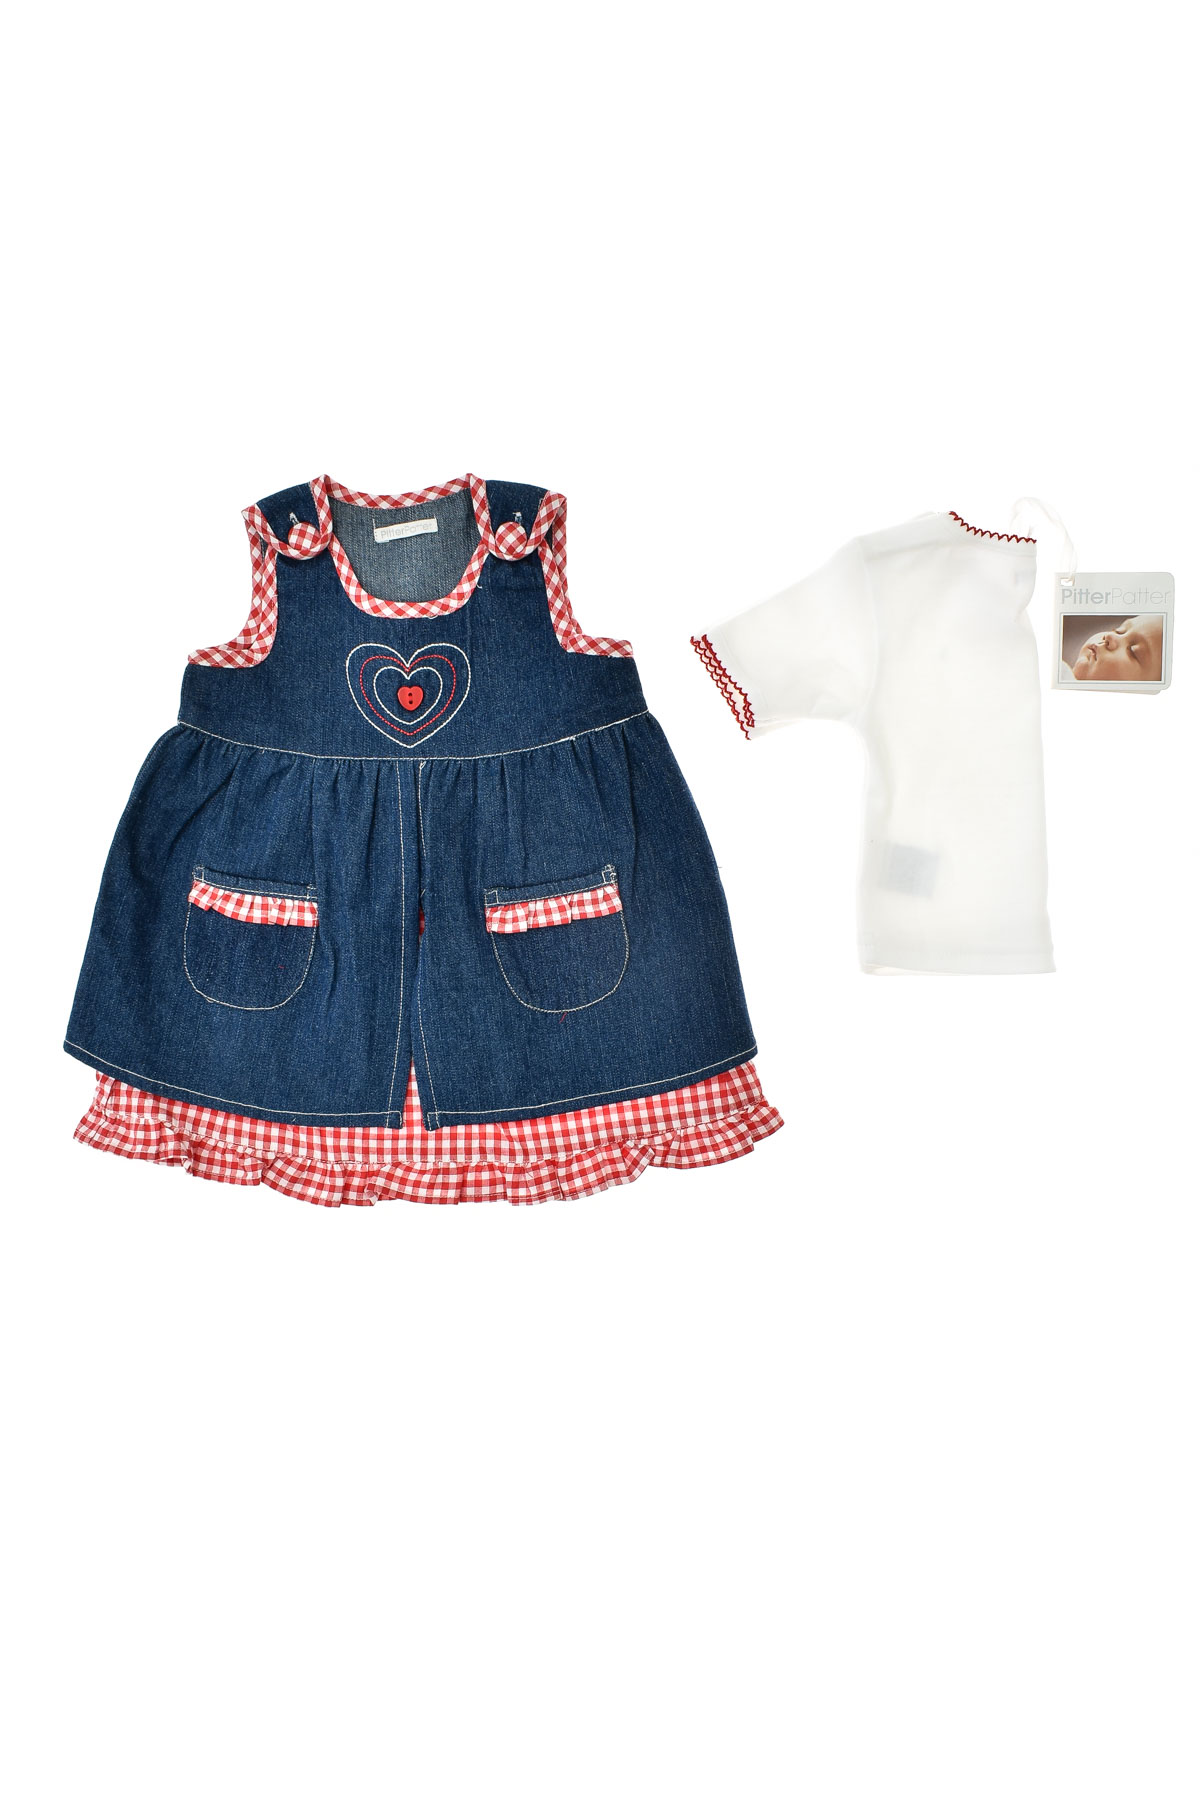 Baby's dress - Pitter Patter - 2